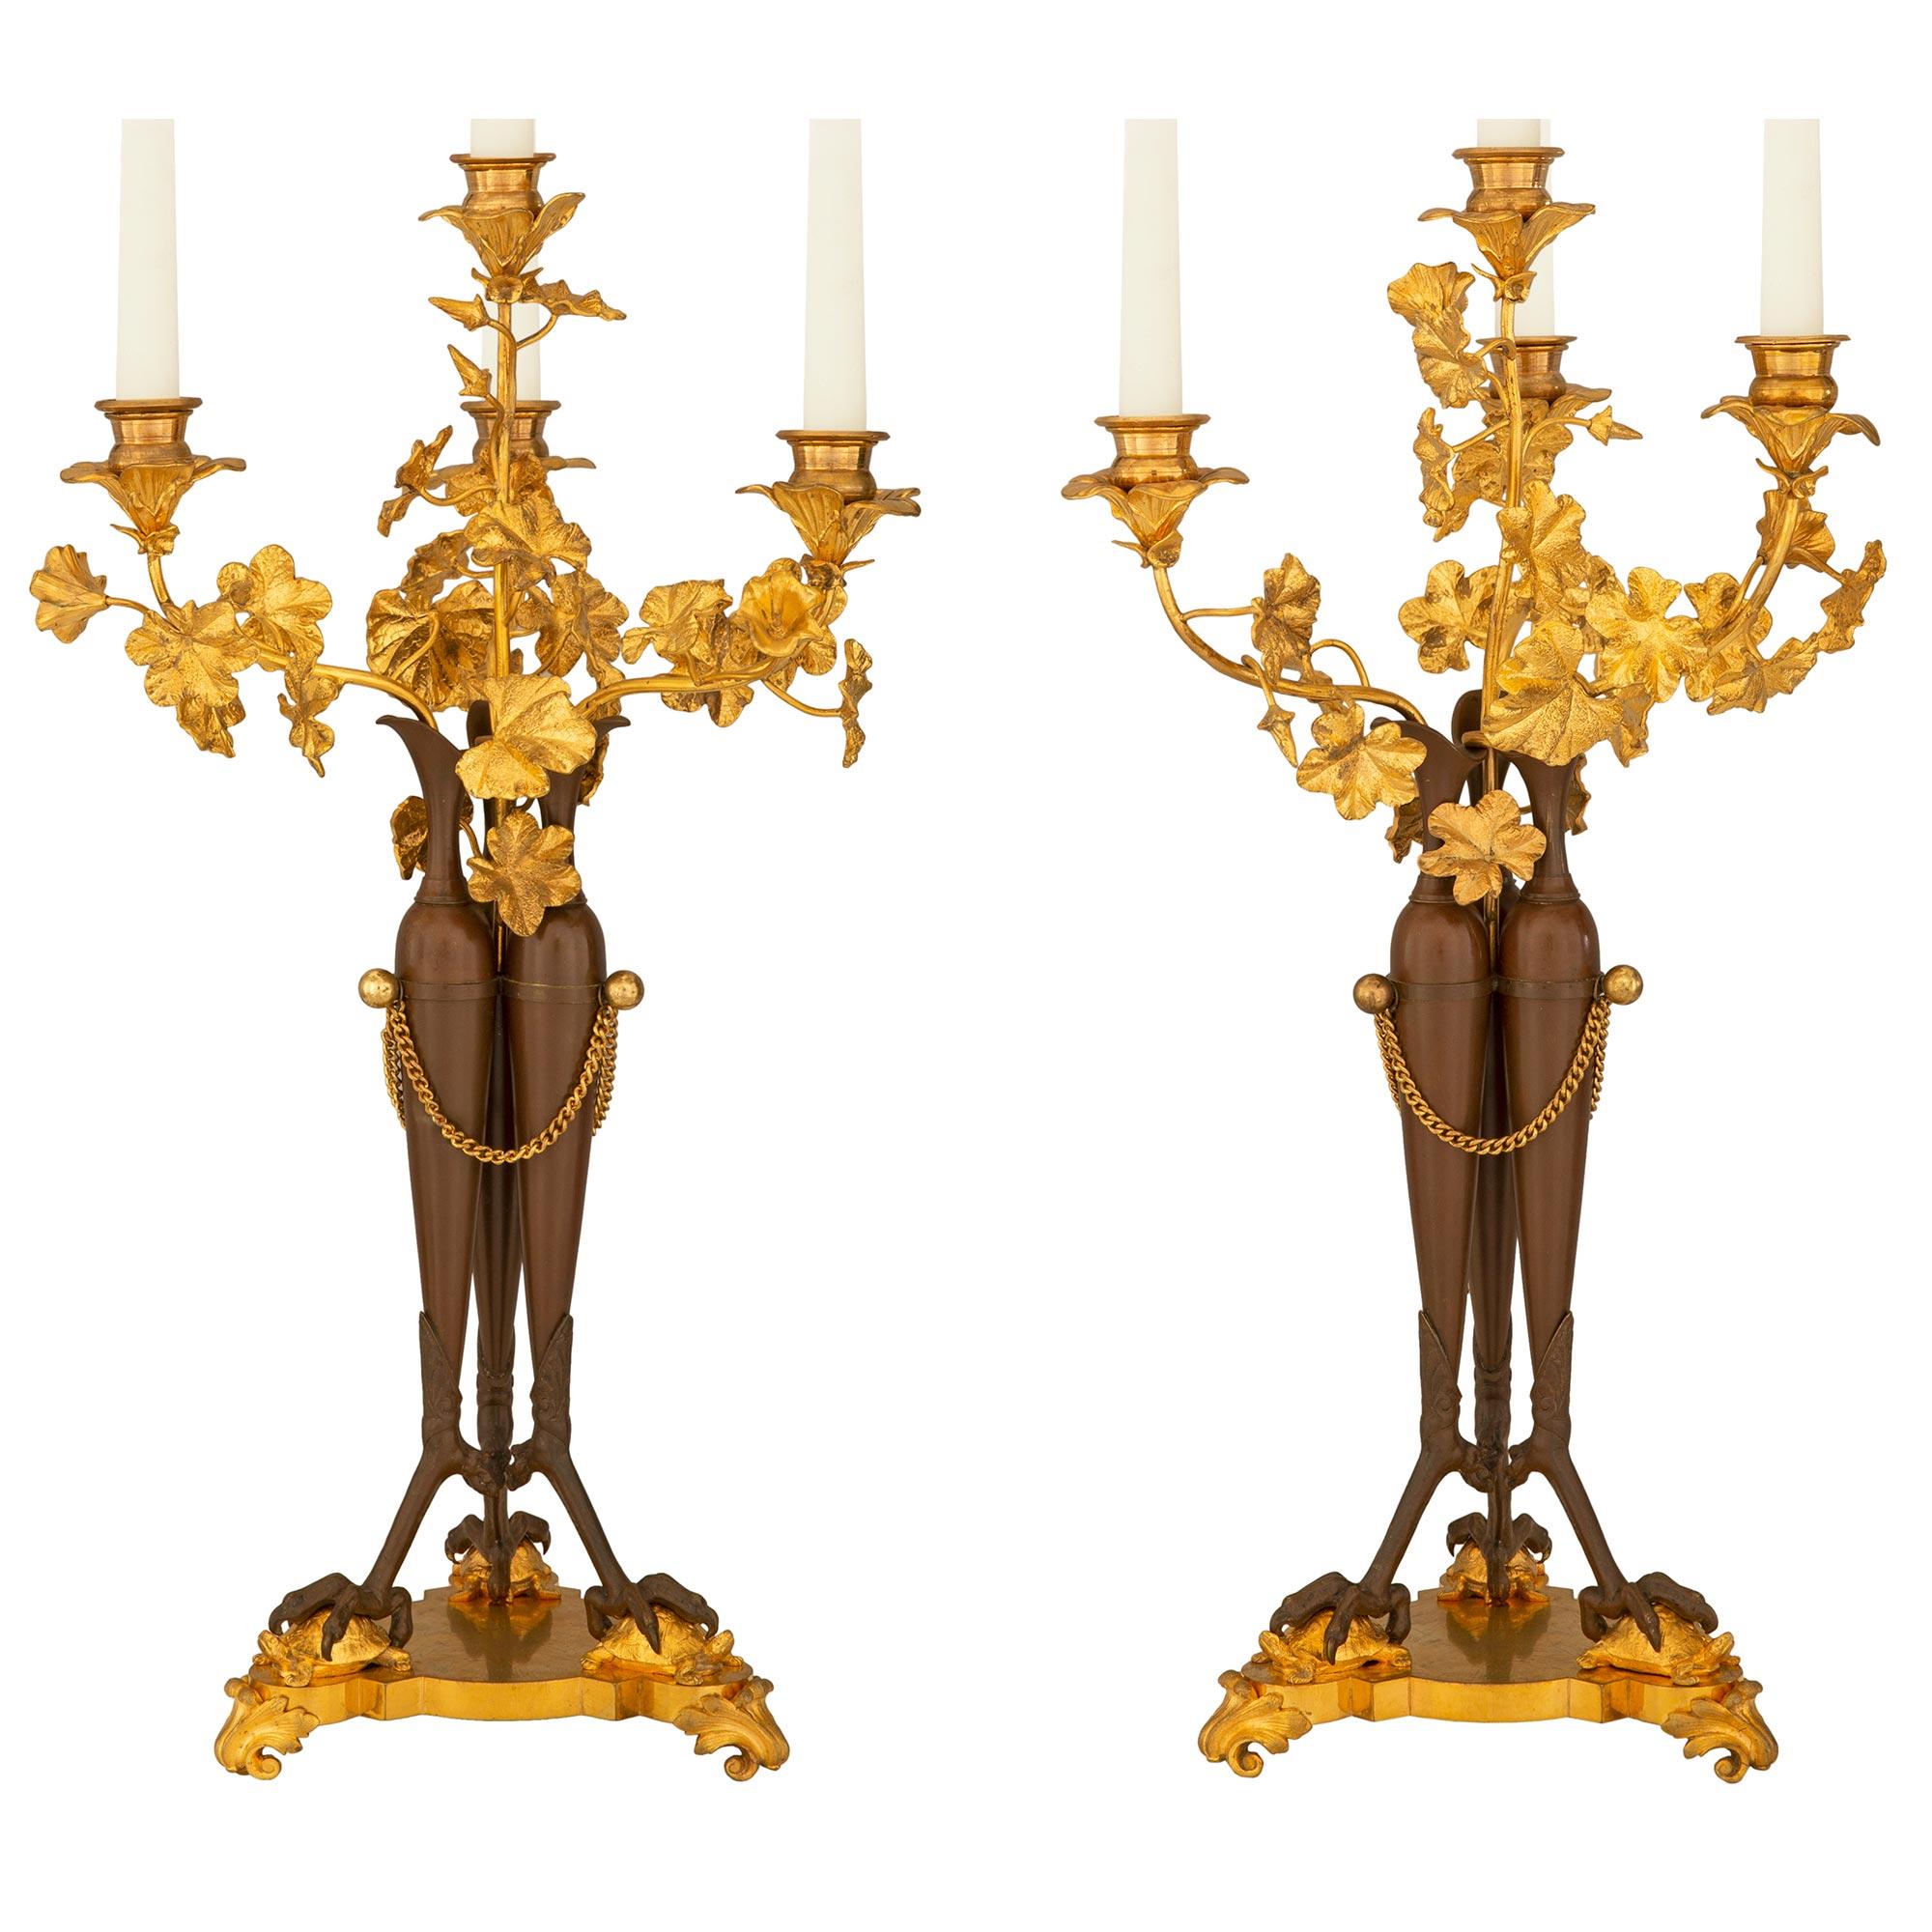 A striking pair of French 19th century neoclassical st. patinated bronze and ormolu candelabras. Each four arm candelabra is raised by a triangular scalloped base with fine scrolled foliate feet below impressive claws holding charming finely